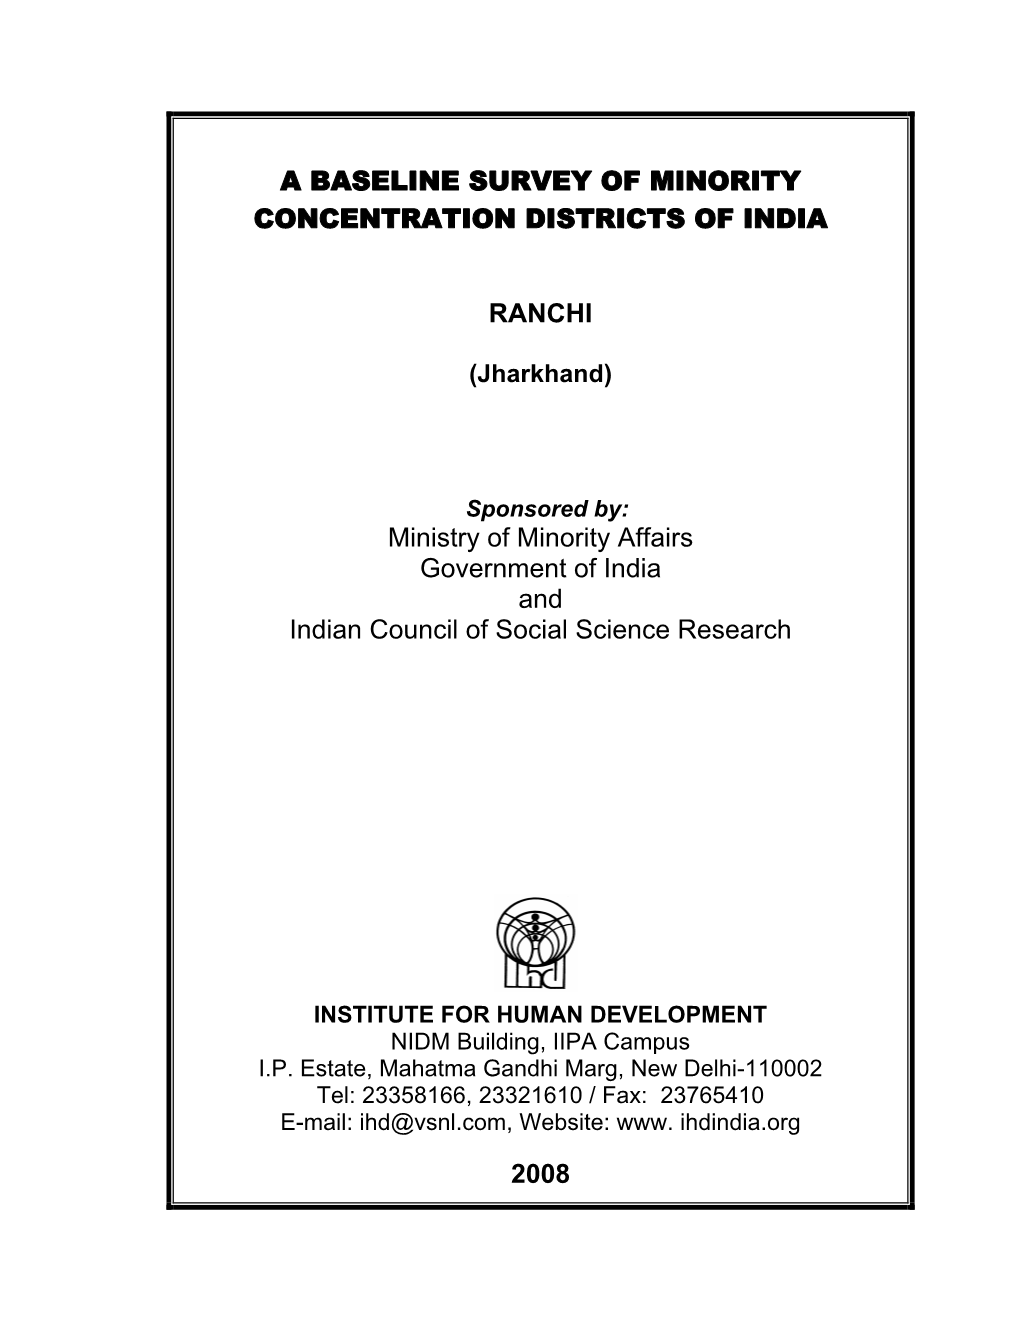 A Baseline Survey of Minority Concentration Districts of India Ranchi